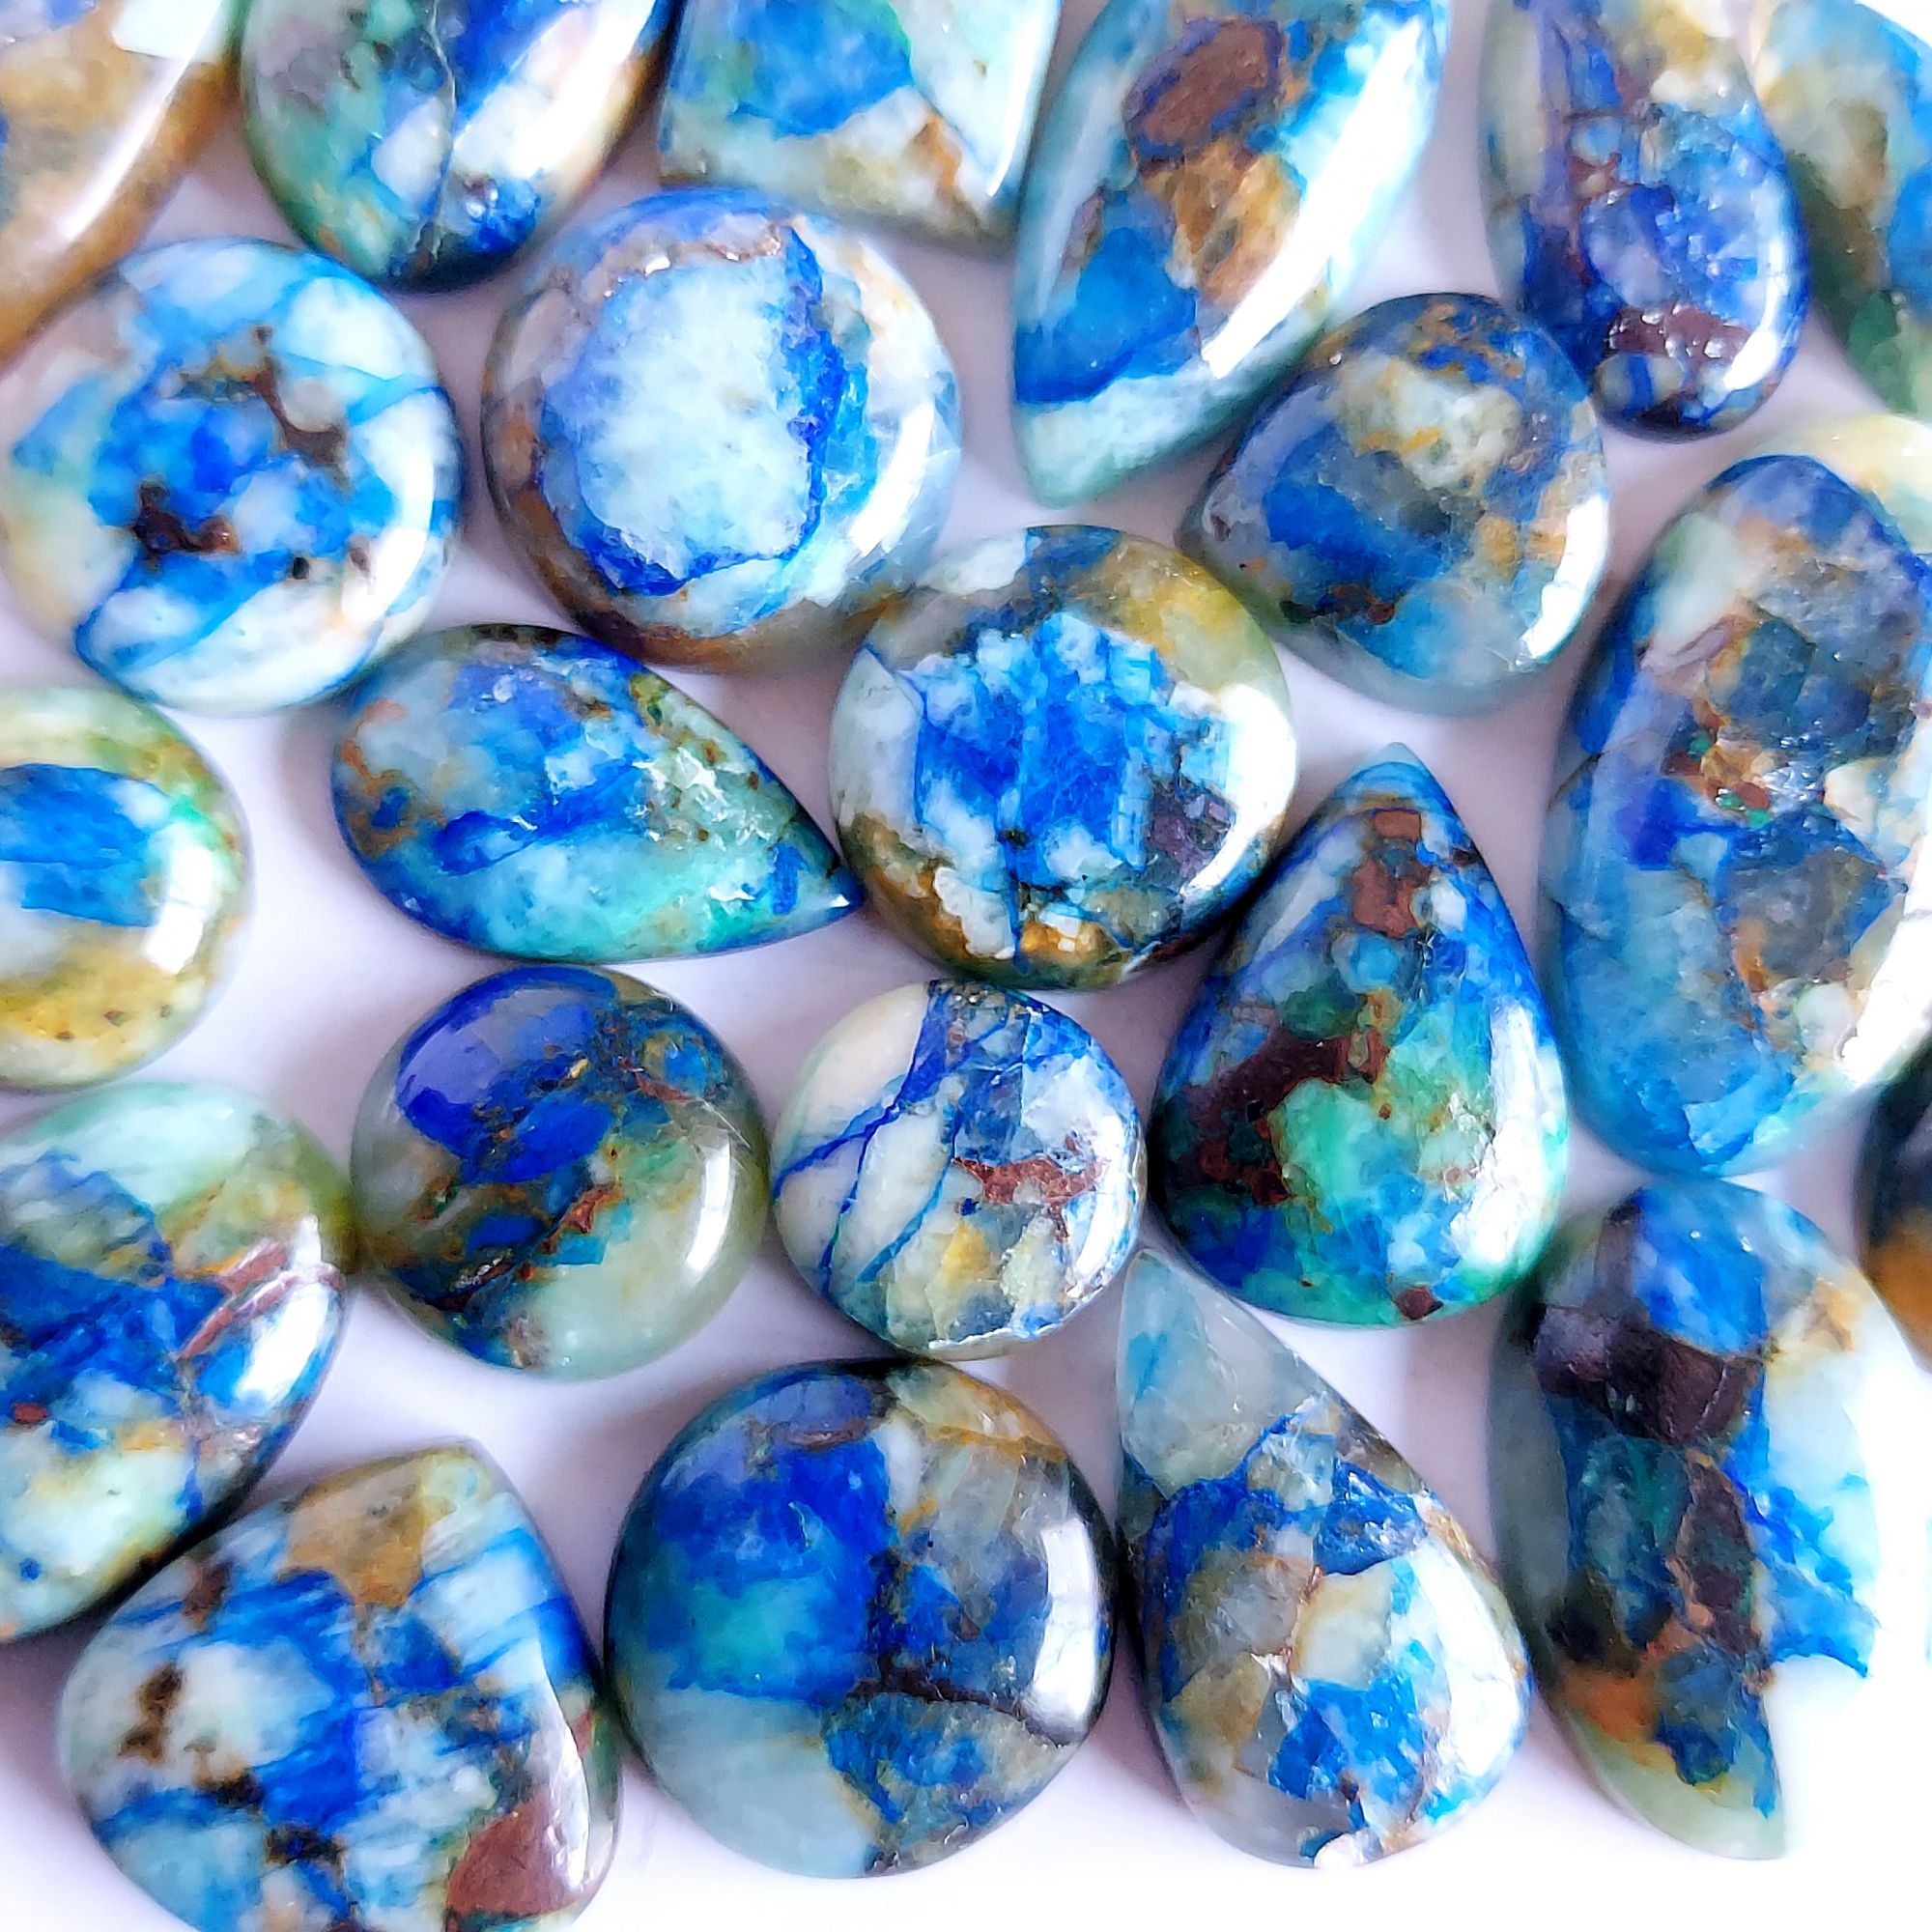 258.Cts 22 Pcs Natural Smooth Azurite Mix Loose Gemstone Cabochon Lot Size 28x12 12x12mm Wholesale Gemstone For jewelry